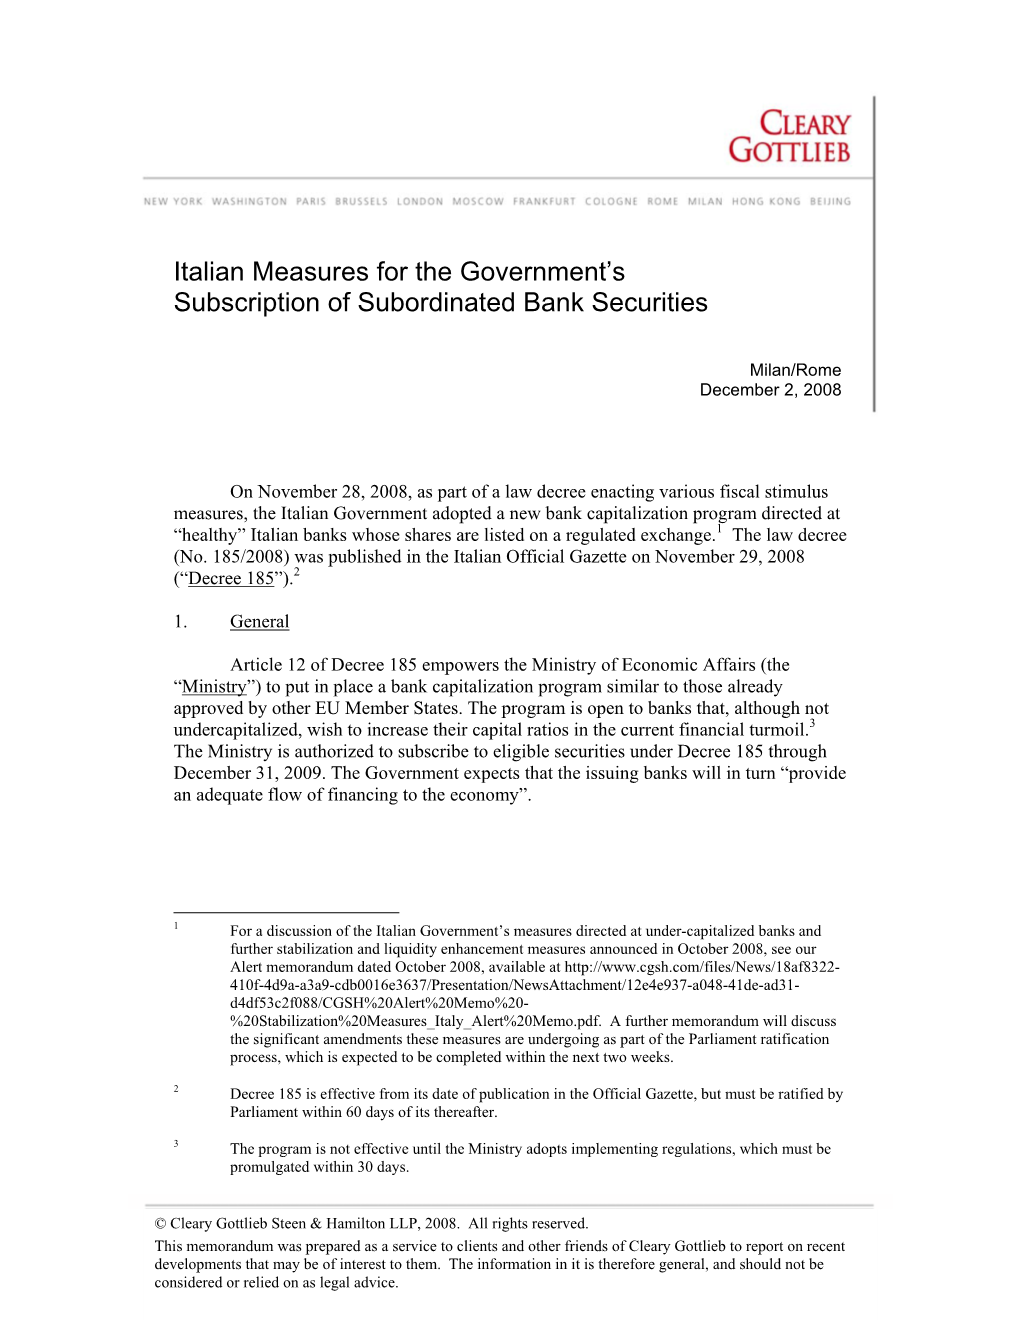 Italian Measures for the Government's Subscription of Subordinated Bank